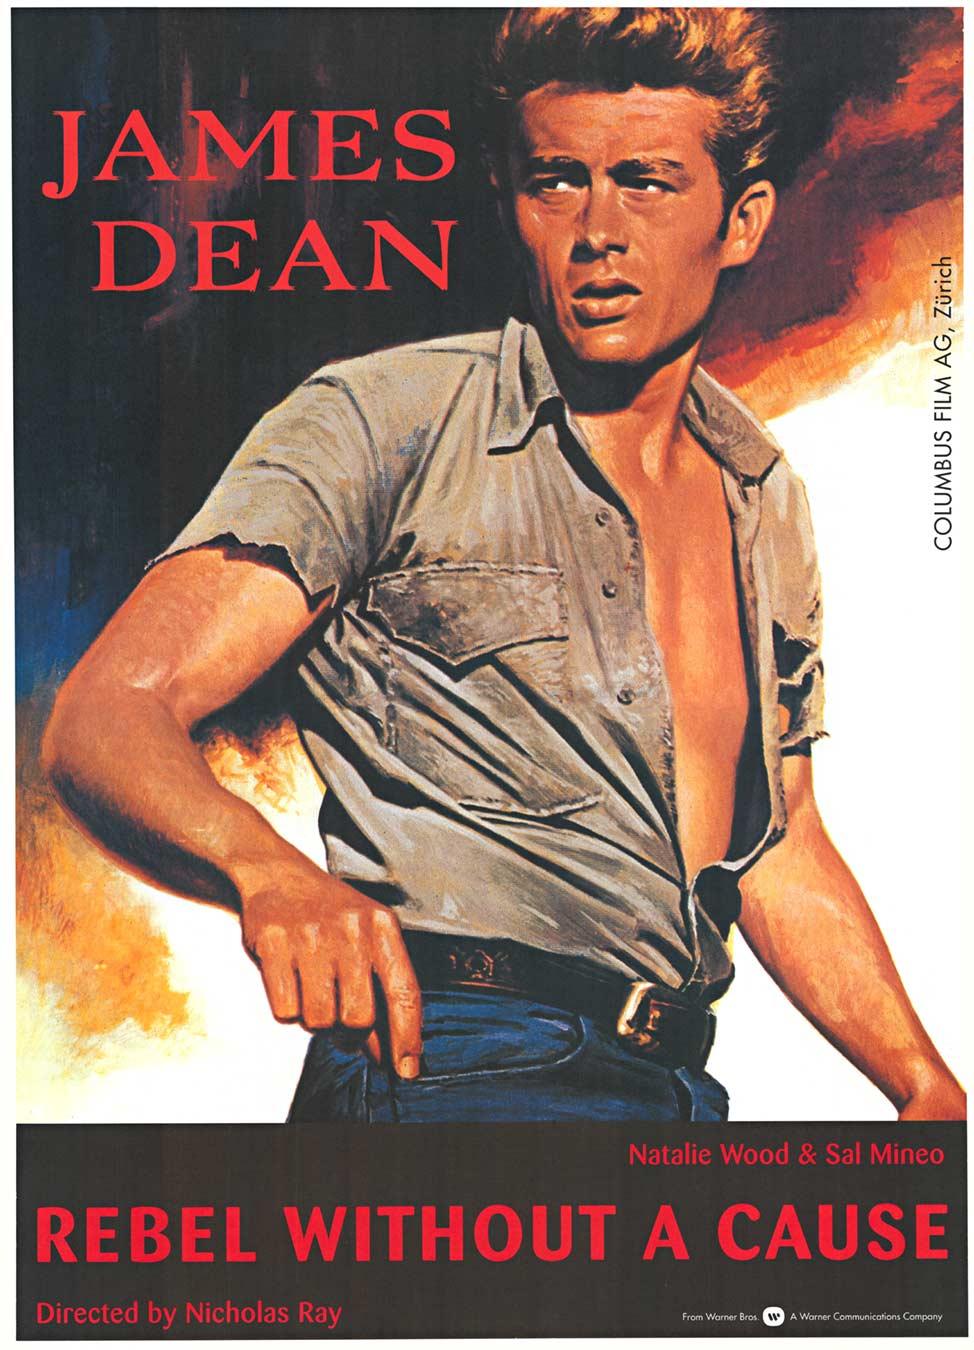 Original James Dean  Rebel Without a Cause vintage Swiss movie poster